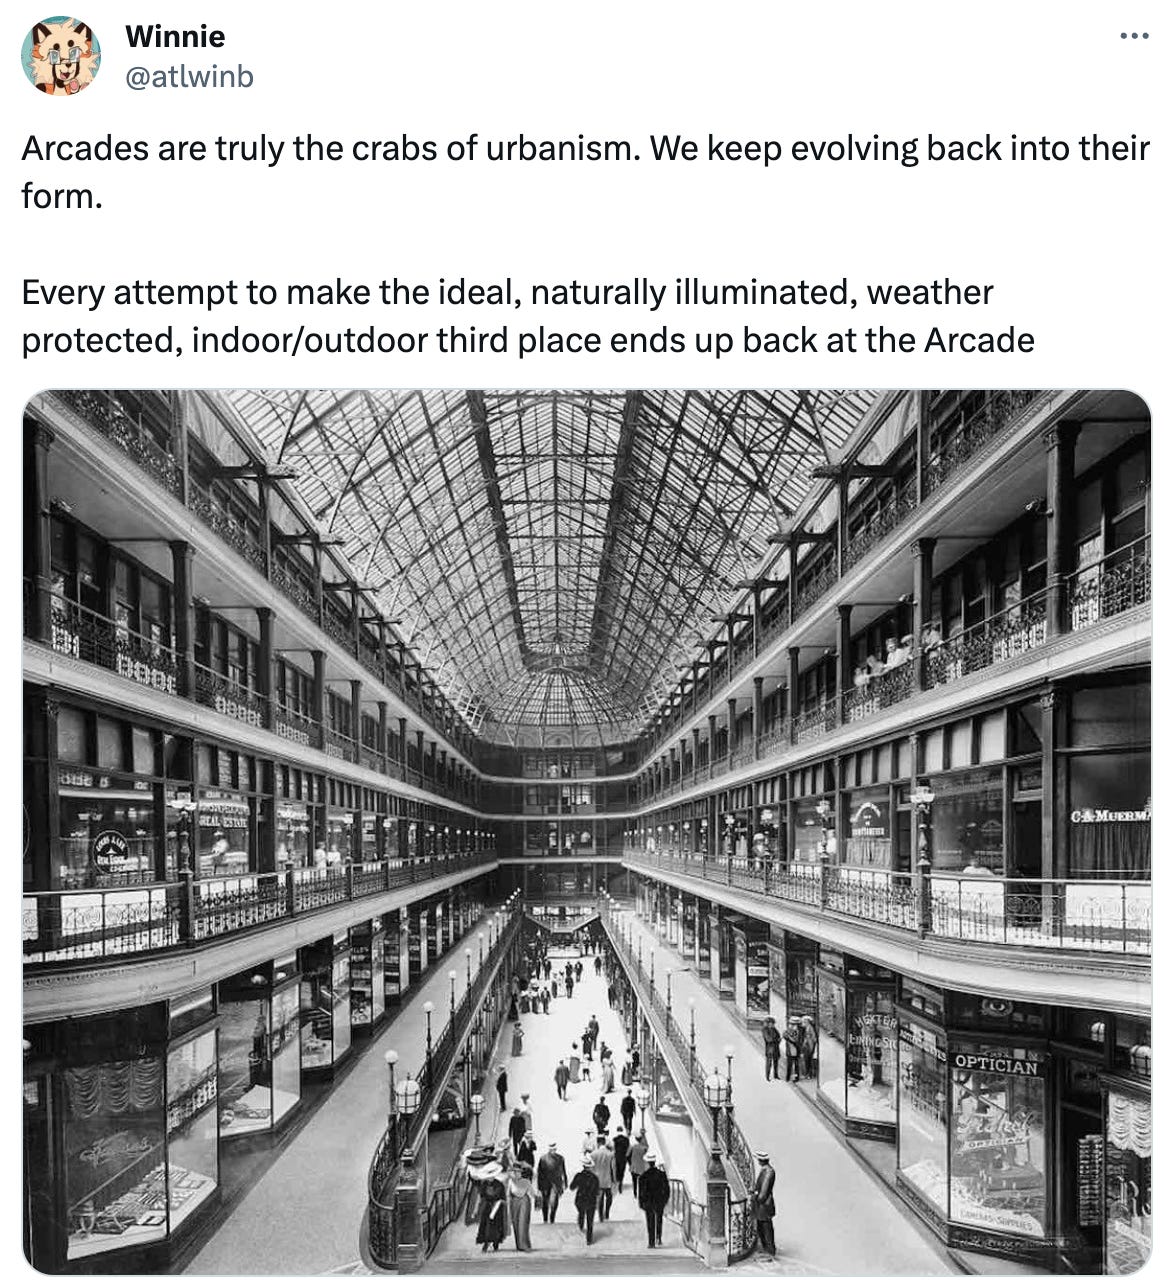  See new posts Conversation Winnie @atlwinb Arcades are truly the crabs of urbanism. We keep evolving back into their form.   Every attempt to make the ideal, naturally illuminated, weather protected, indoor/outdoor third place ends up back at the Arcade Quote Ramsey Kilani 🌐🔰 @Ramsey_Kilani ·